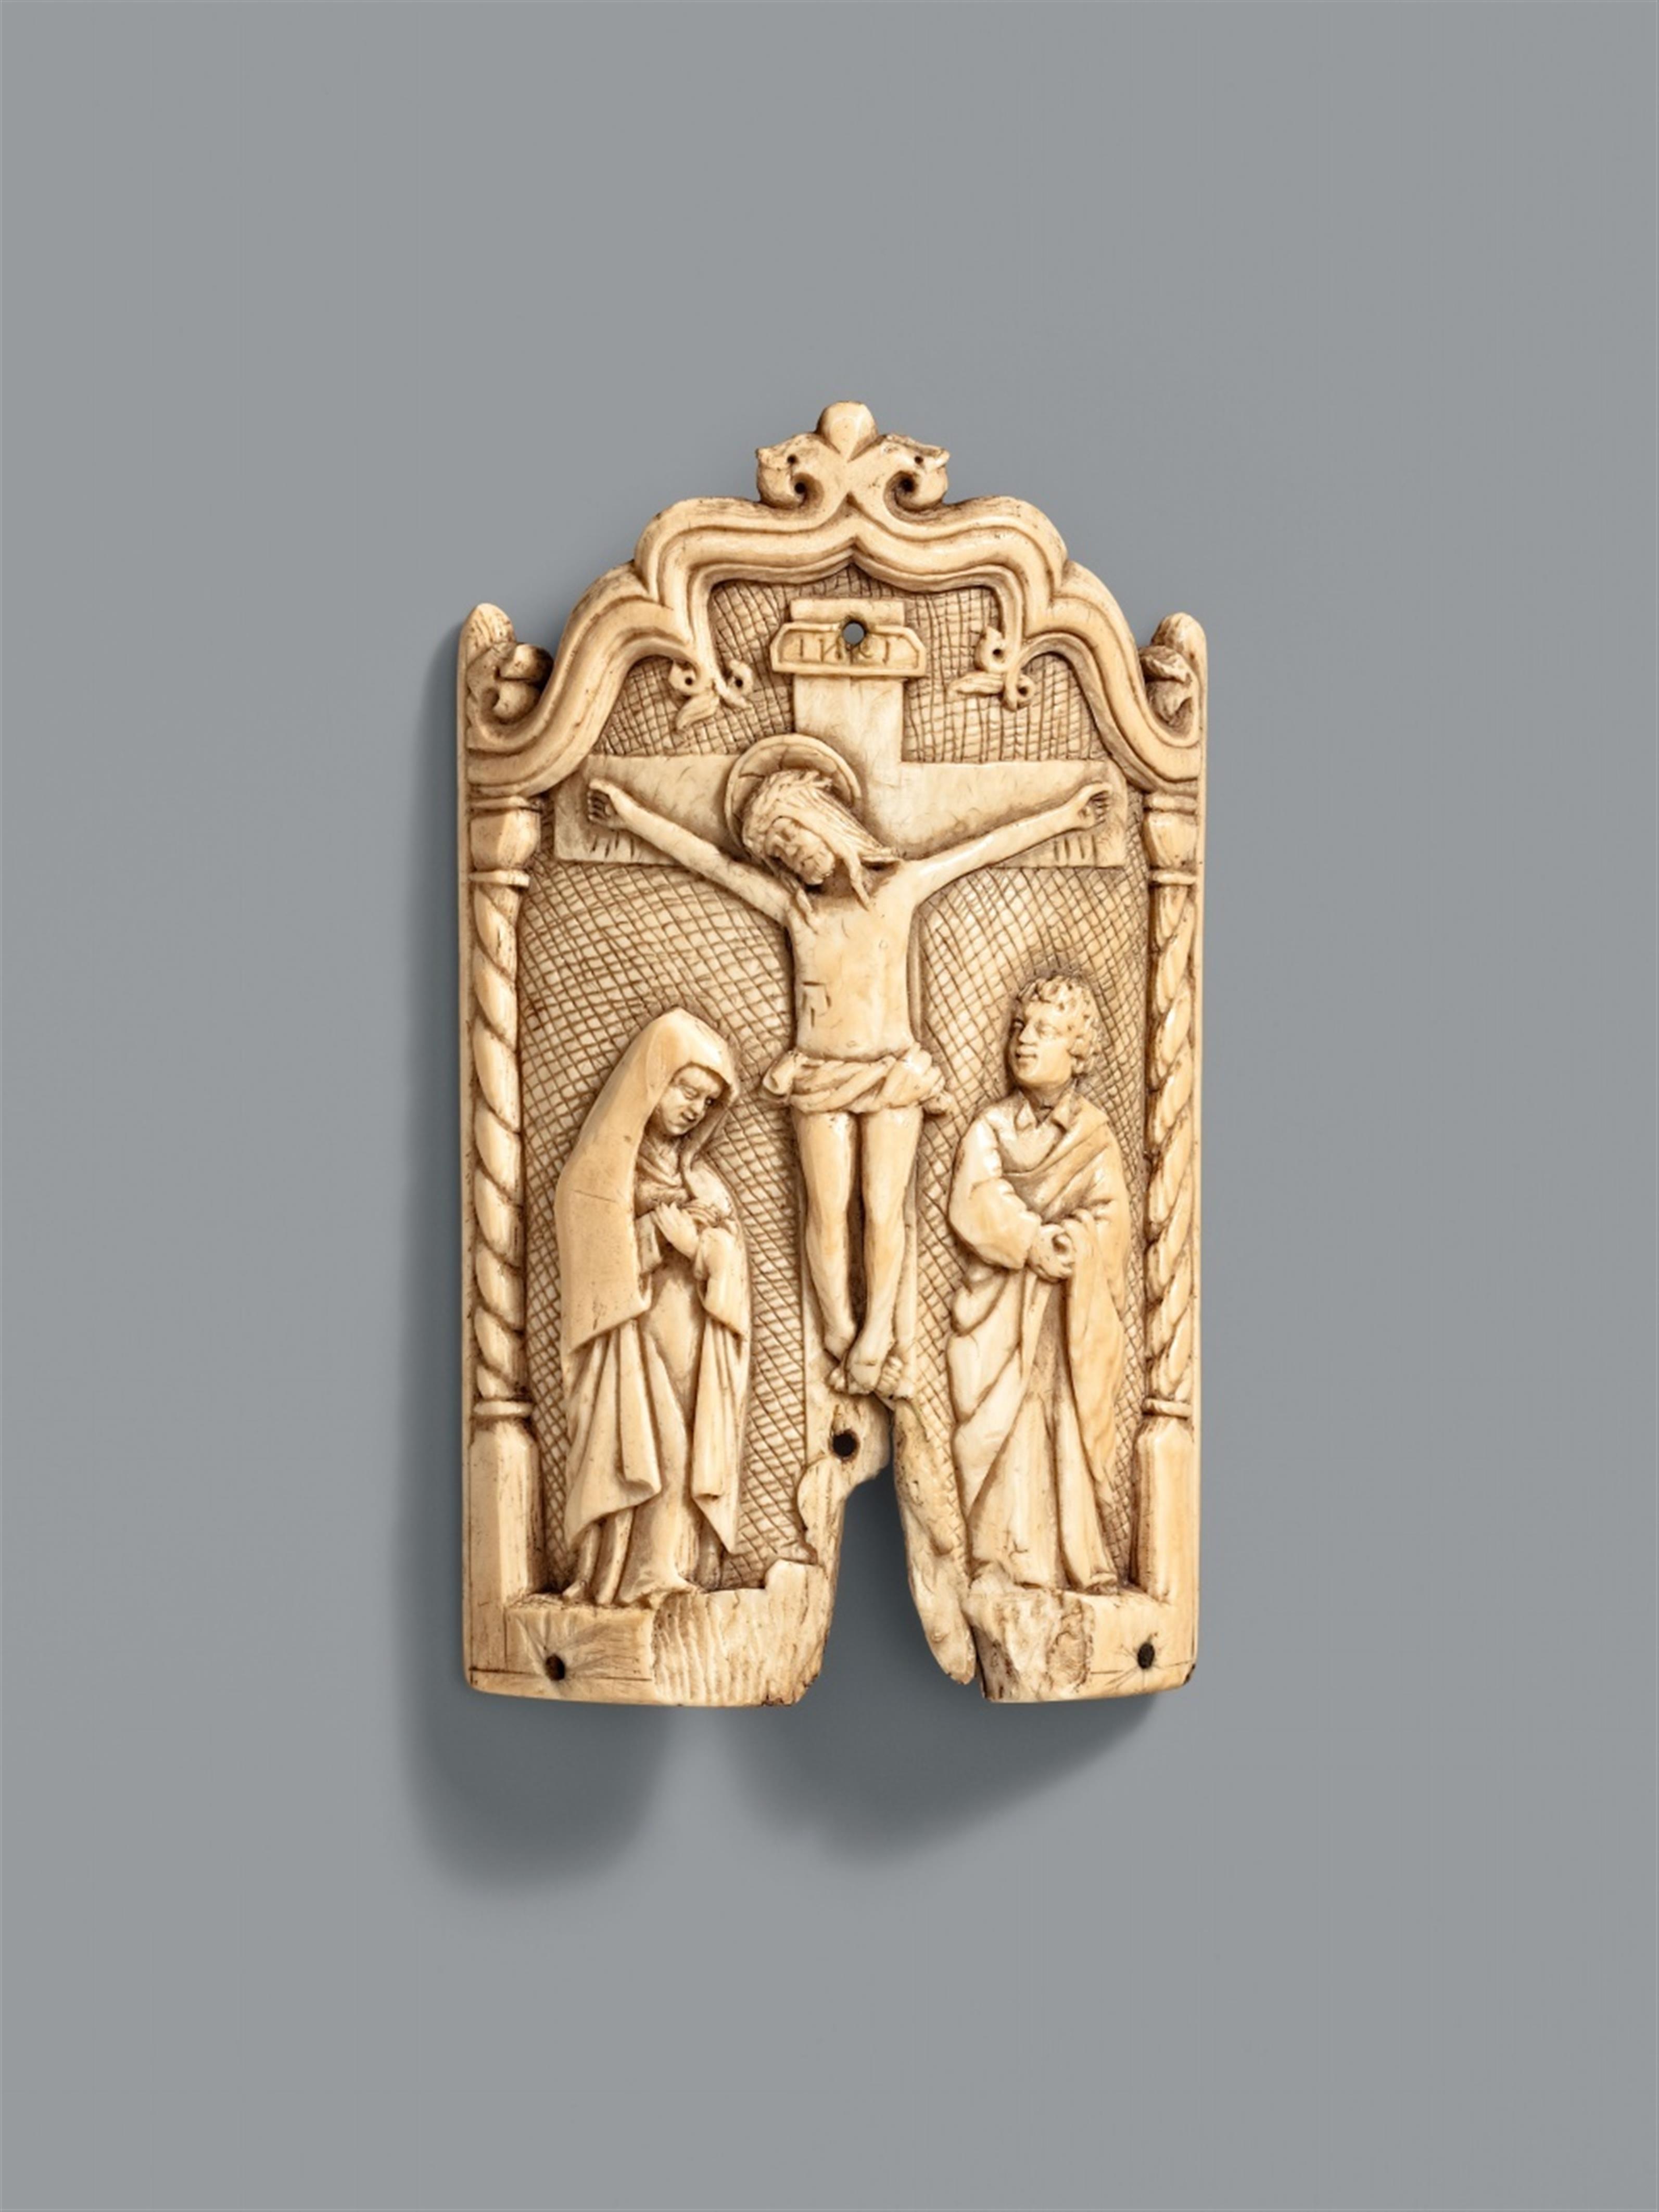 Northern France early 16th century - An early 16th century Northern French carved ivory high-relief crucifixion scene. - image-1